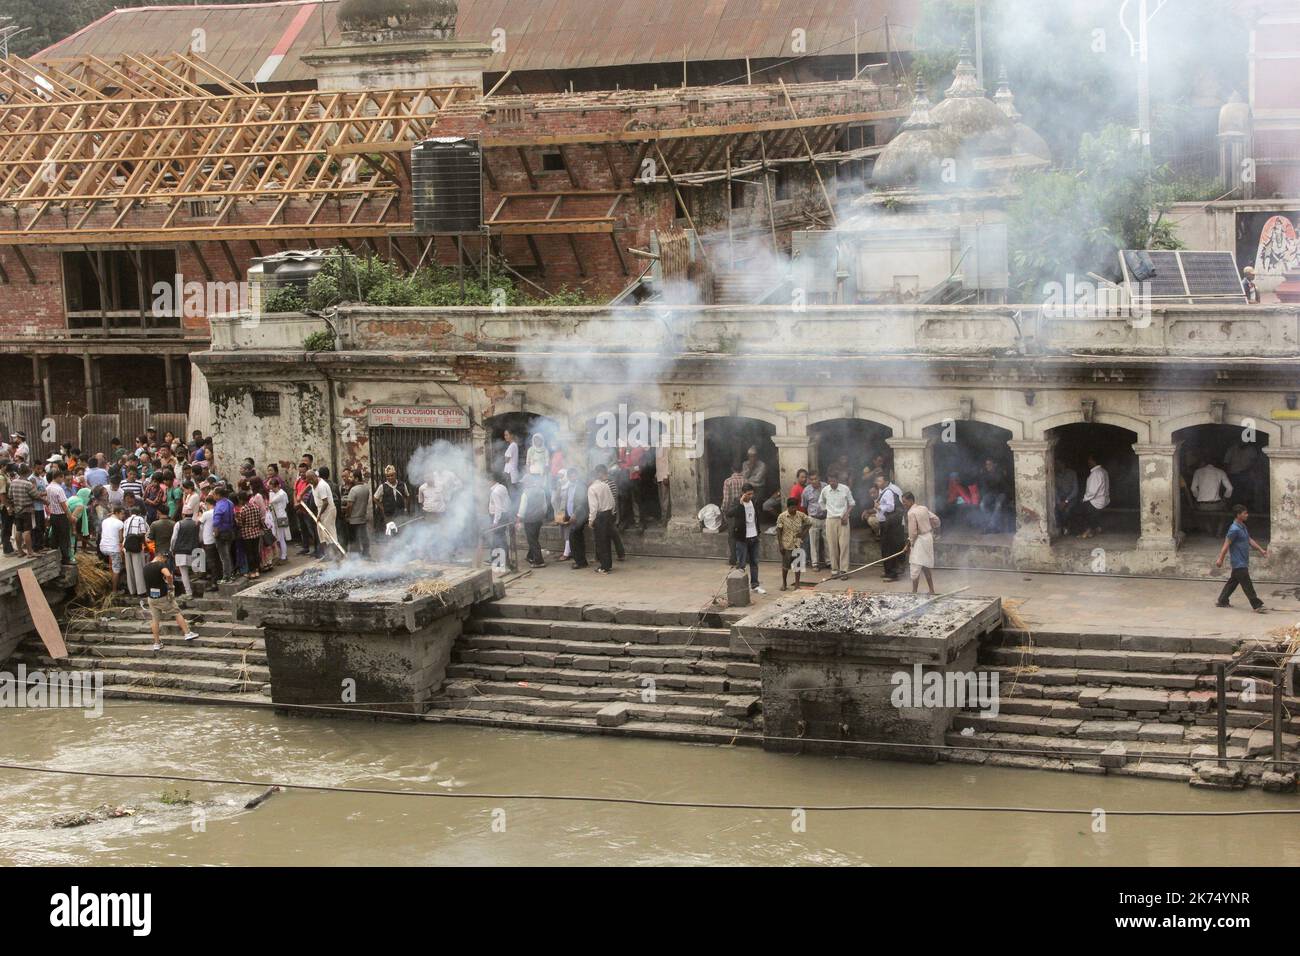 This temple is used primarily for outdoor cremation of the dead. The bodies are transported 24 hours after the death to the temple and then burned for 3 hours before seeing ashes thrown into the Bagmati River that runs through the temple. Only members of the royal family are cremated directly in front of the temple of Pashupatinath. Stock Photo